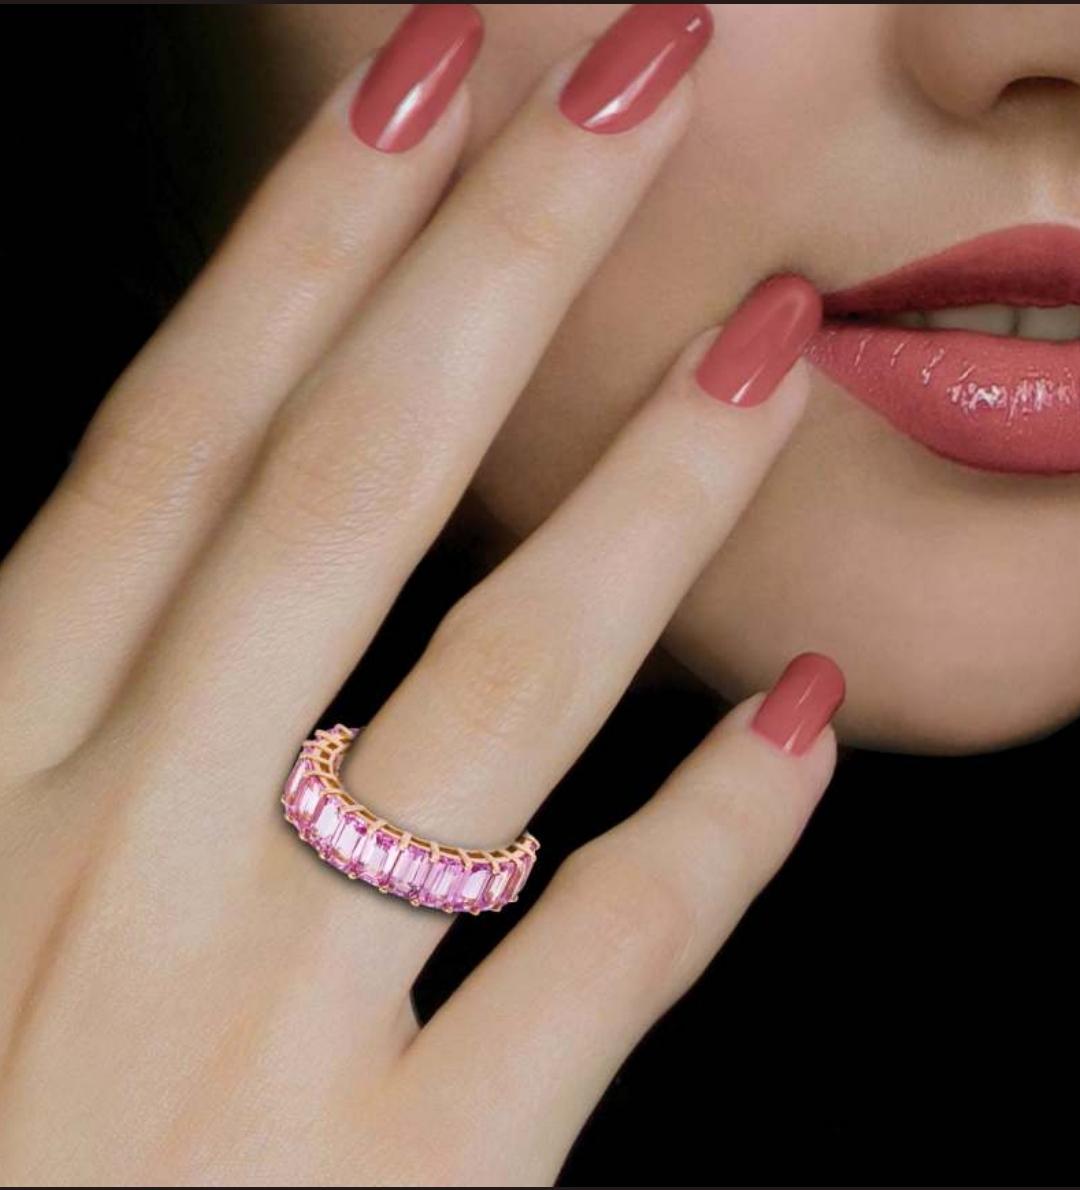 The Following Item we are offering is this Rare Important Radiant 18KT Gold Gorgeous Glittering and Sparkling Magnificent Fancy Emerald Cut Pink Sapphire Ring Eternity Band. Ring Contains approx 7.25CTS of Beautiful Fancy Emerald Cut Pink